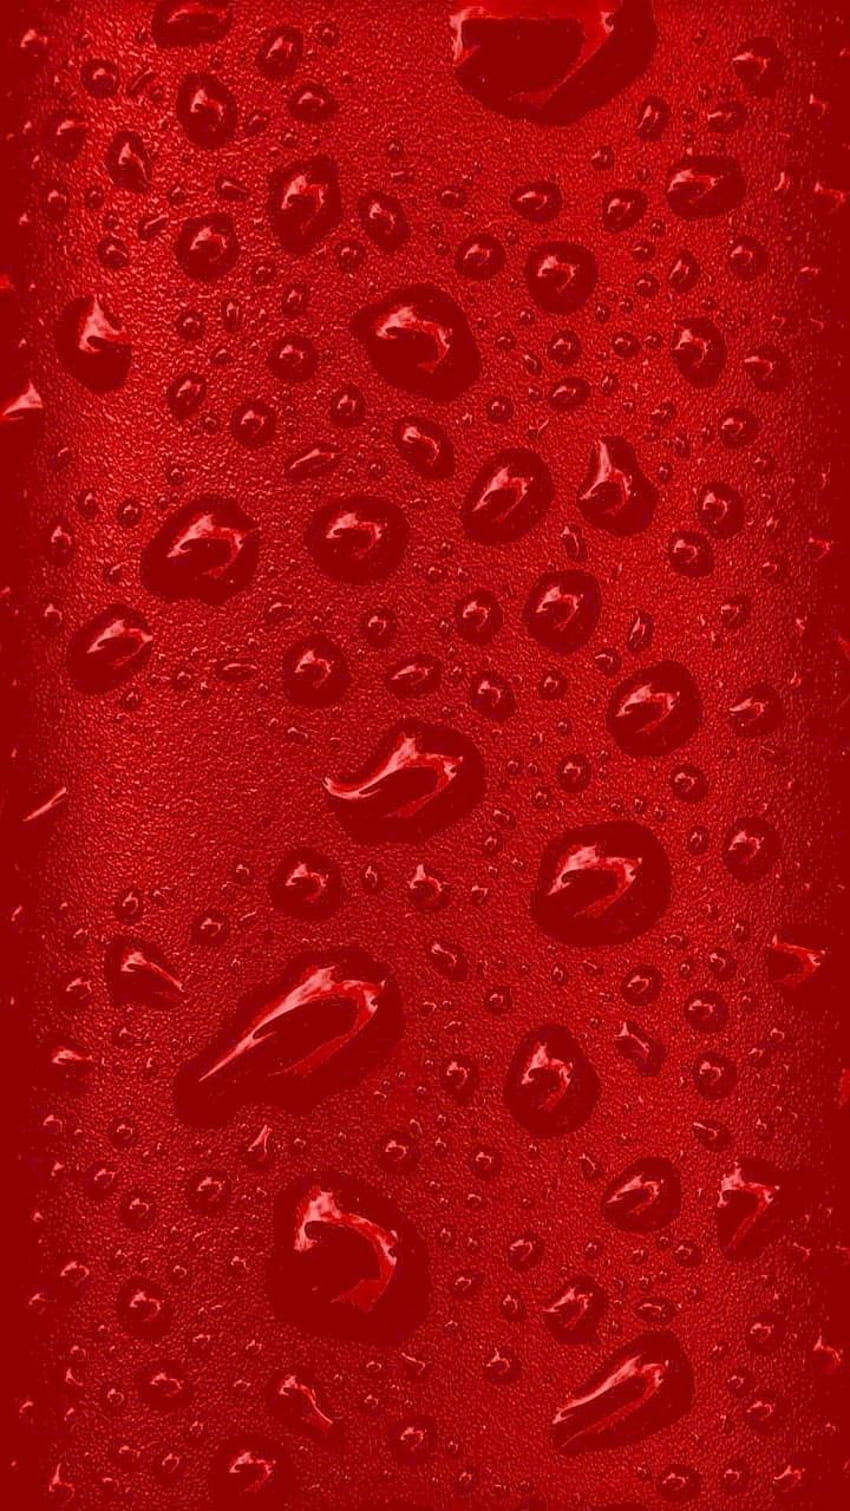 Water drops on a red background - Blood